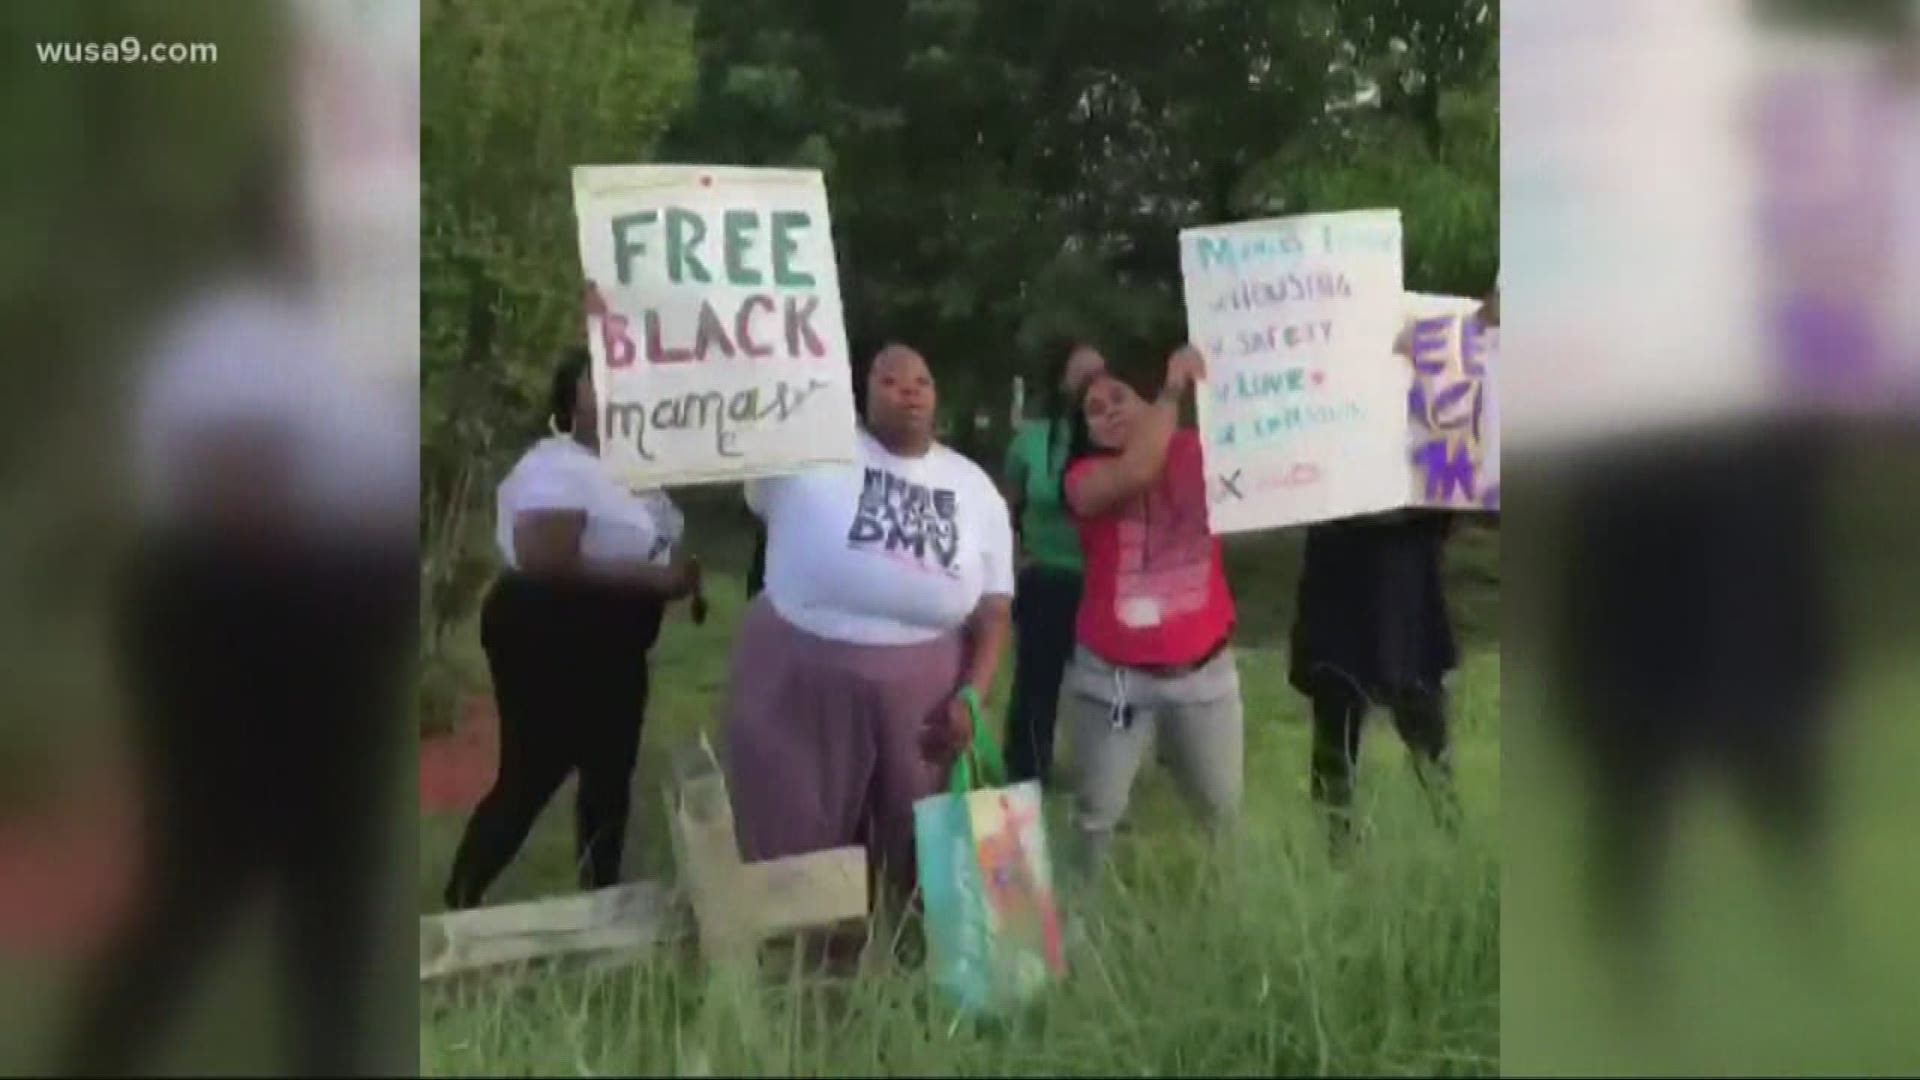 A group of women are fighting to get black moms who committed minor crimes out of jail for Mother's Day.